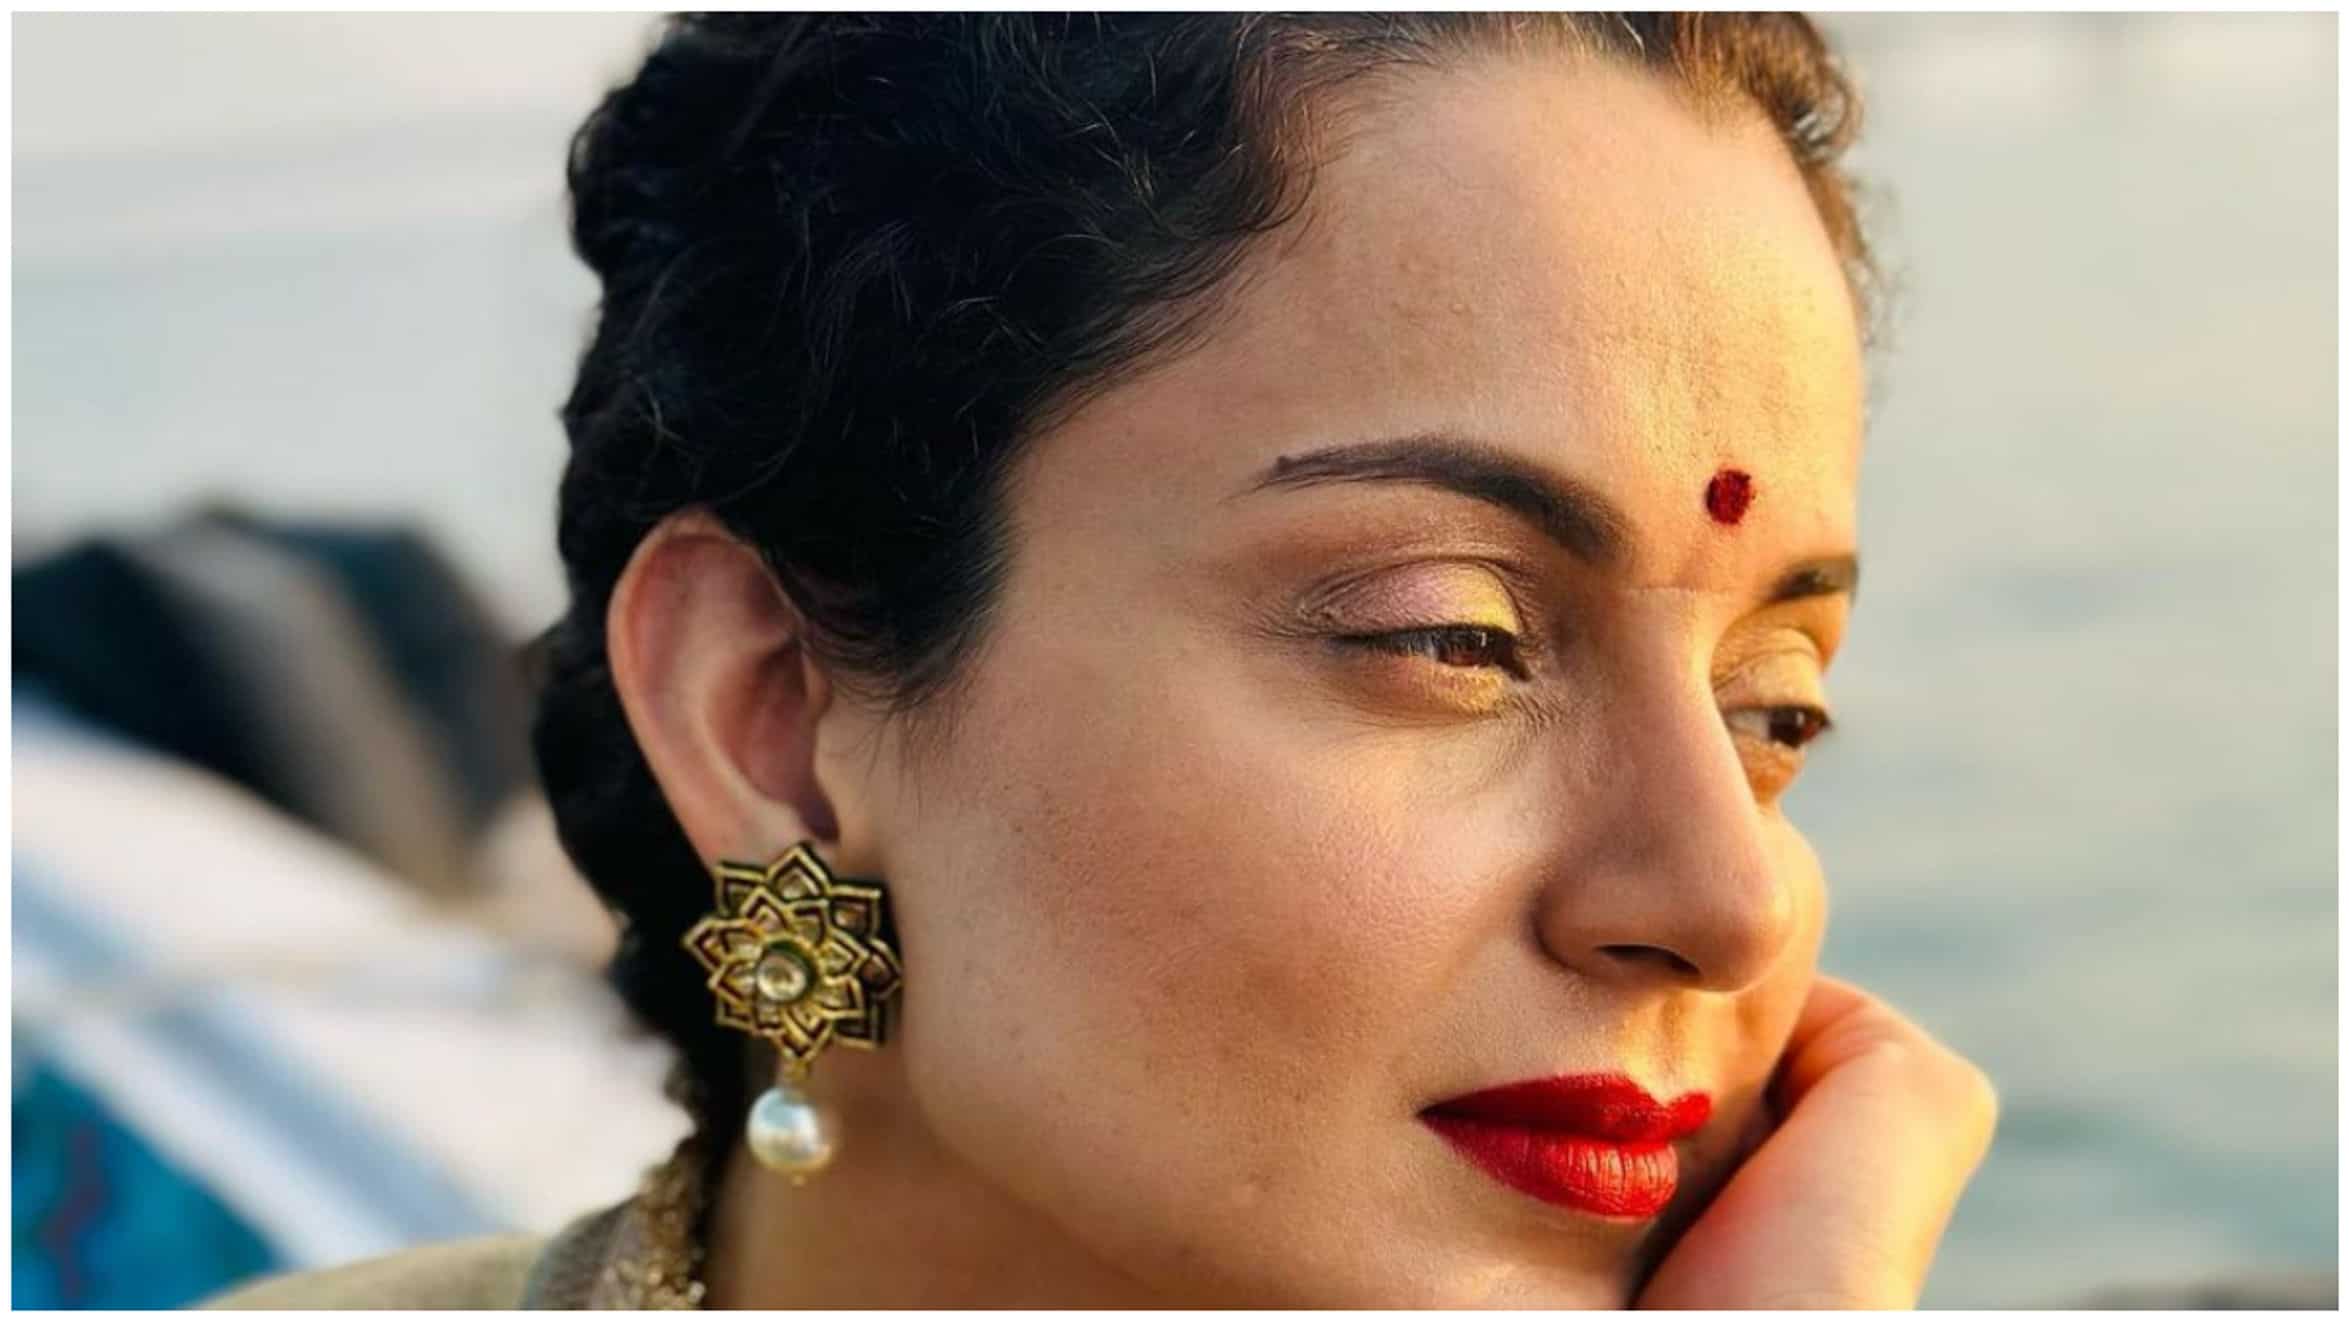 https://www.mobilemasala.com/film-gossip/Kangana-Ranaut-wants-to-make-a-film-on-Bilkis-Bano-claims-JioCinema-rejected-her-as-she-supports-BJP-i204615